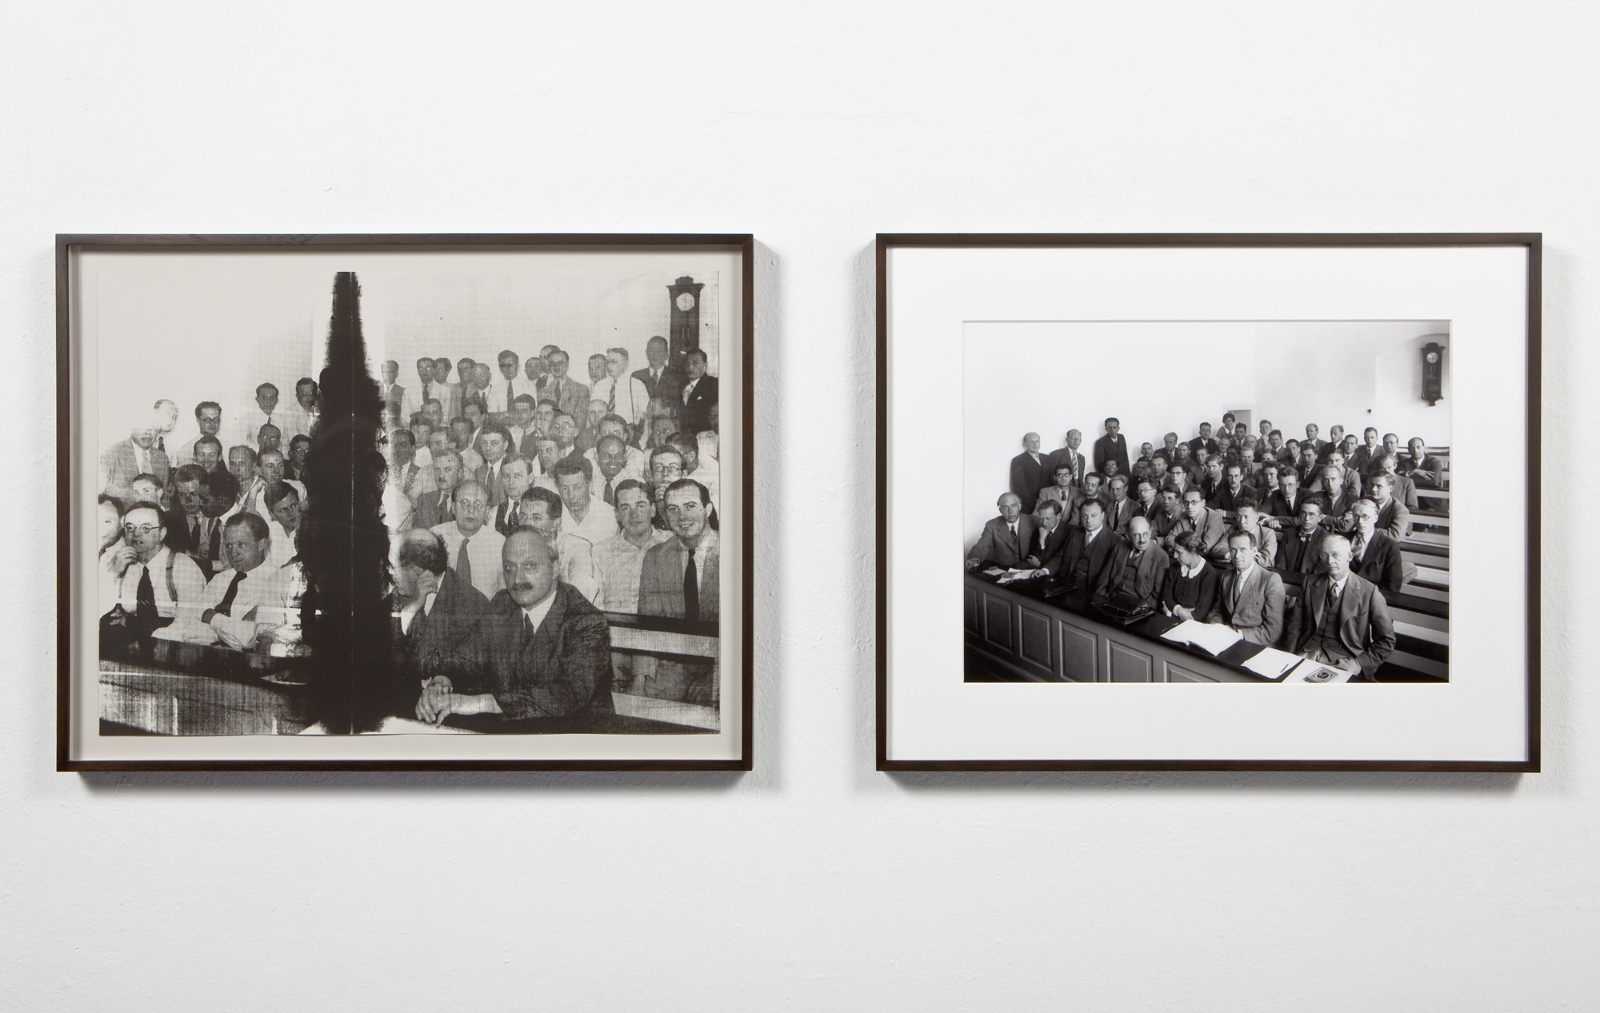  View of  Heisenberg , 2009 (left) and  Heisenberg , 2010 (right) Left: Silkscreen on paper,&nbsp;28 x 21 inches Right: Silver gelatin print,&nbsp;23 x 17 inches 